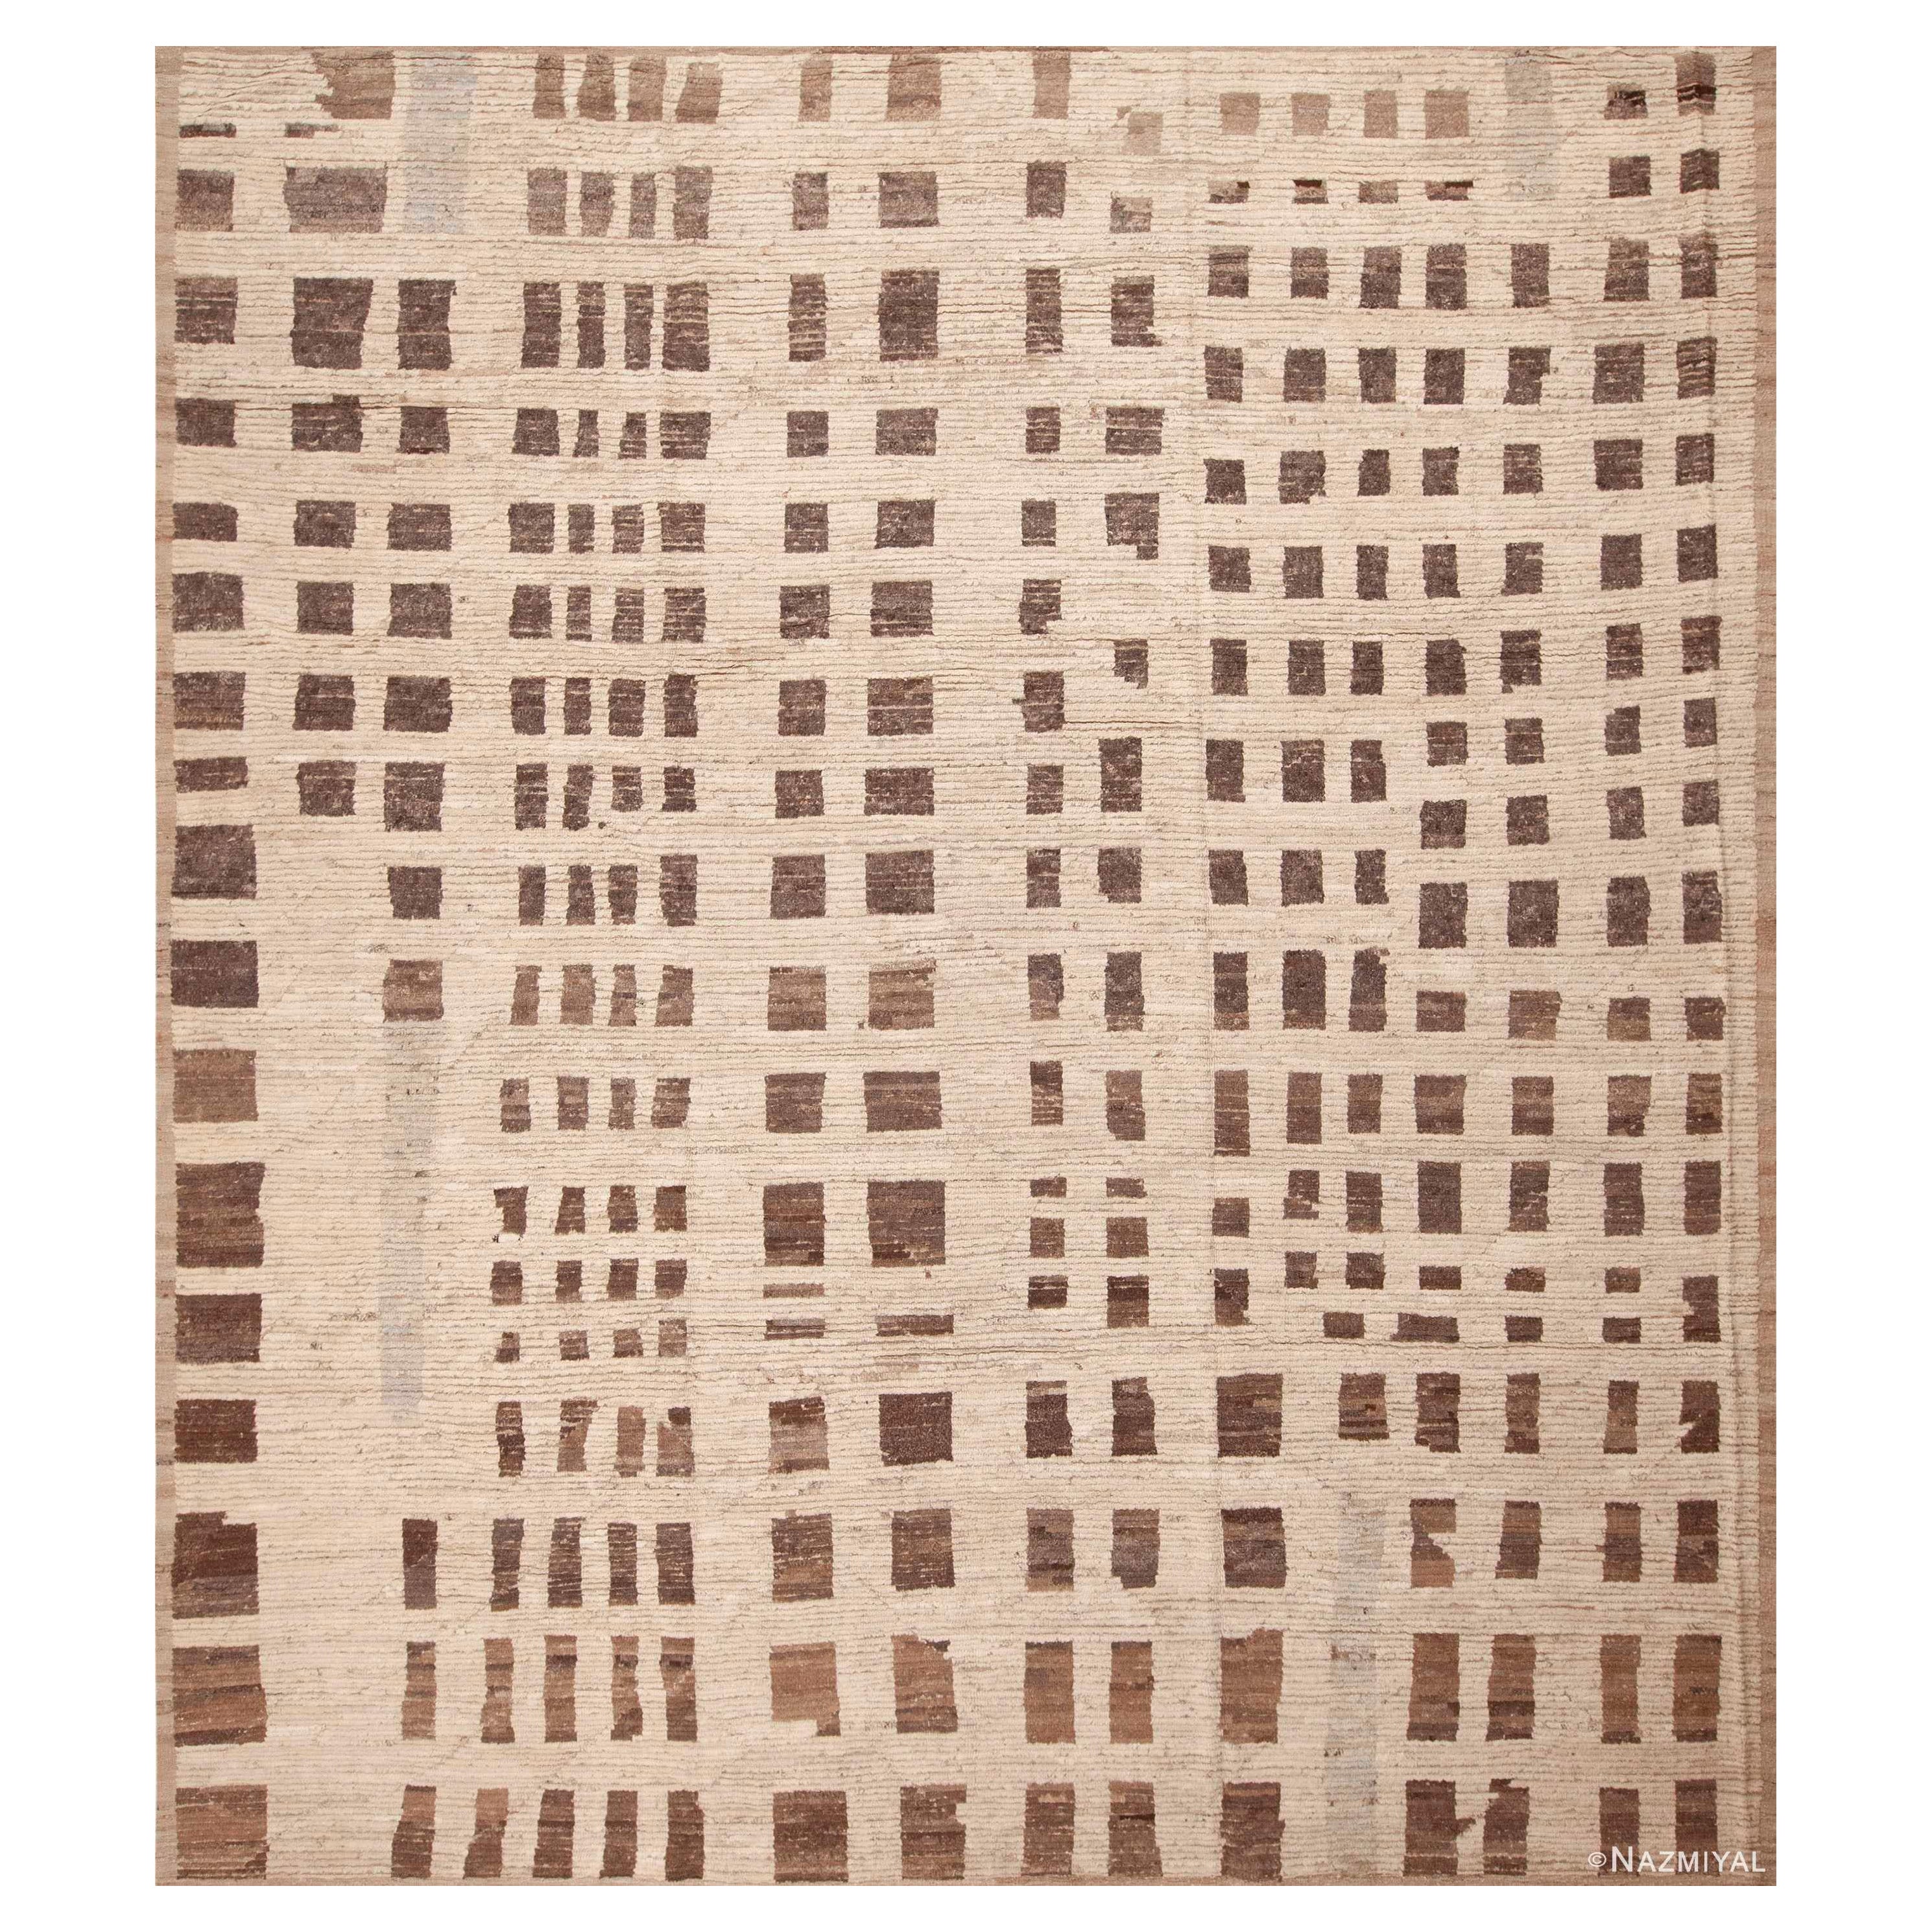 Nazmiyal Collection Modern Cream Brown Tribal Room Size Area Rug 11'10" x 13'7" (tapis de sol)